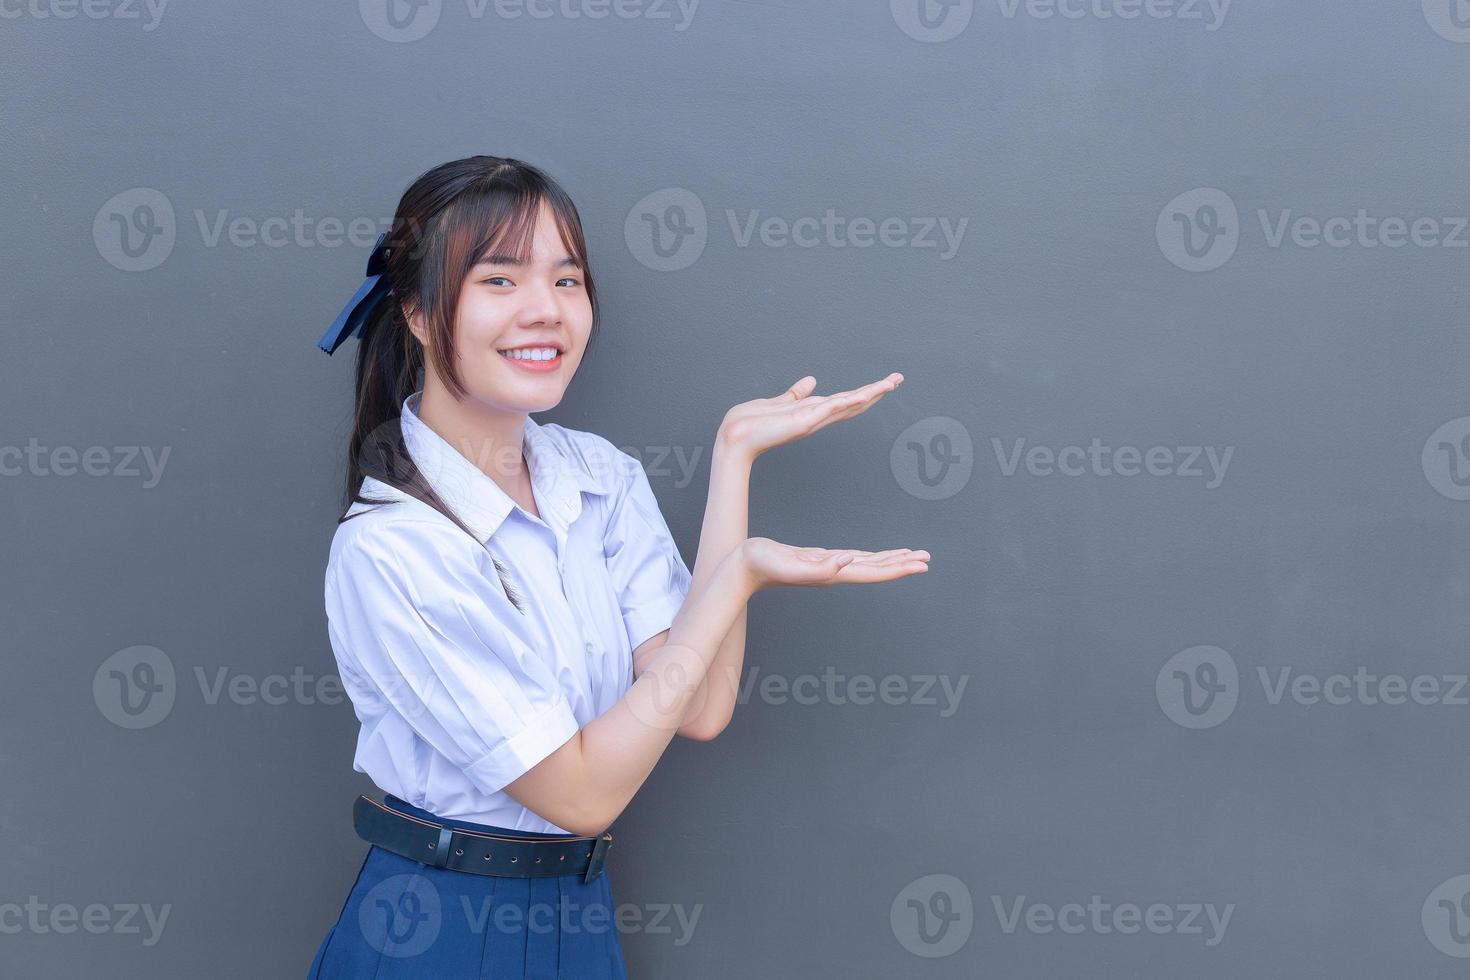 Cute Asian high school student girl in the school uniform with smiles confidently while she looks at the camera to present something happily with grey in the background. photo